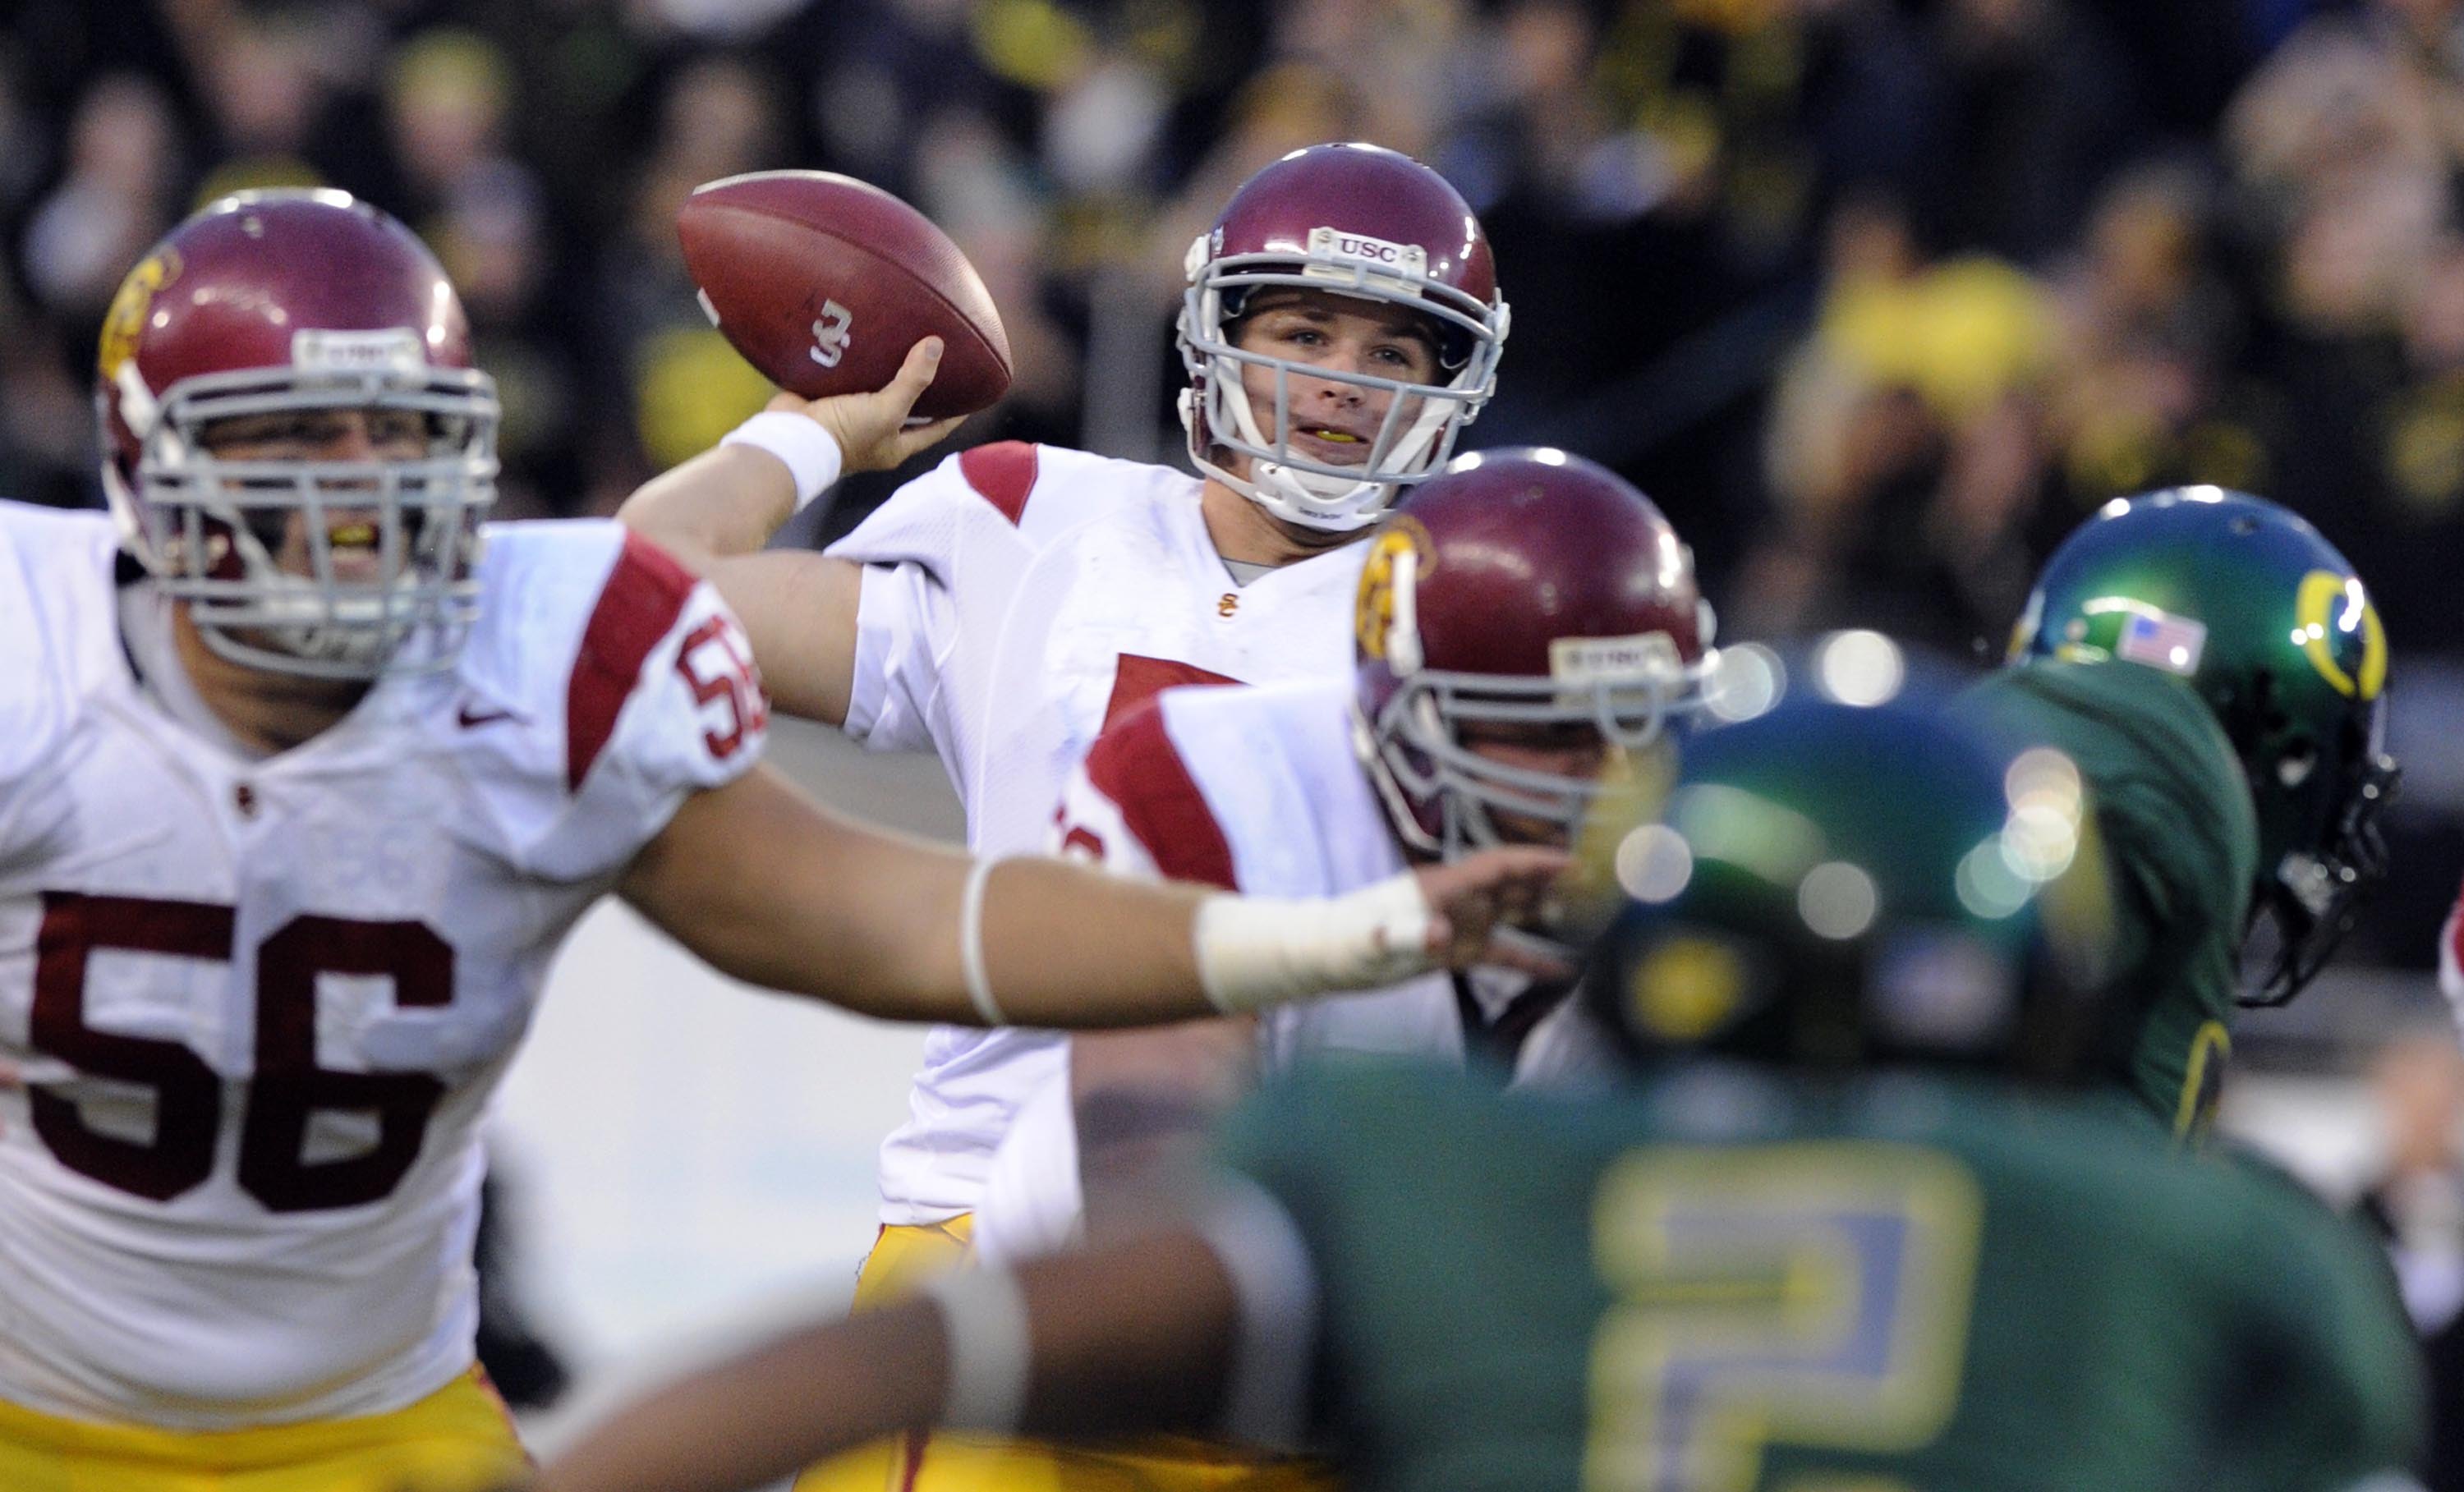 EUGENE, OR - OCTOBER 31: Quarterback Matt Barkley #7 of the USC Trojans throws a pass in the second quarter of the game against the Oregon Ducks at Autzen Stadium on October 31, 2009 in Eugene, Oregon. Oregon defeated USC 47-20. (Photo by Steve Dykes/Gett